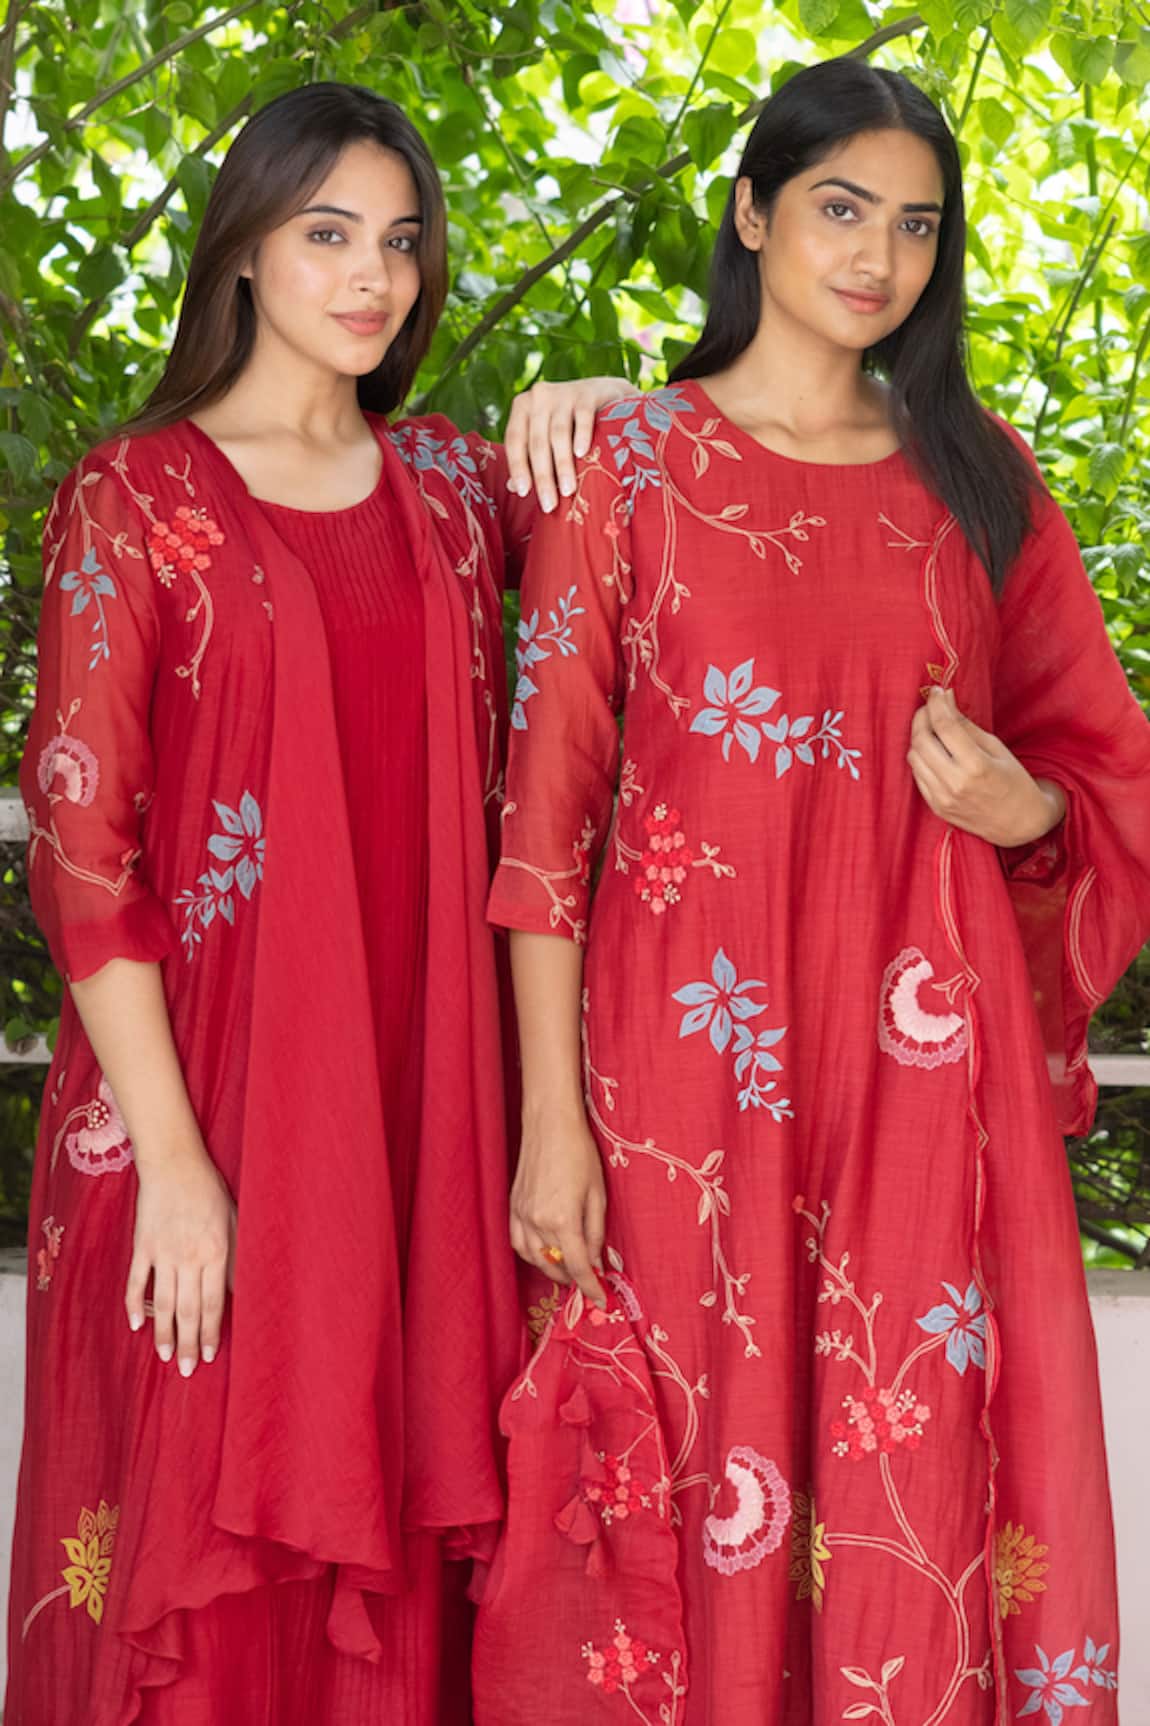 Rue Collection - Check out our new collection on Myntra, Ajio & Flipkart  #ethnicwear #foryoupage #kurti #kurtaset #newarrivals | Facebook